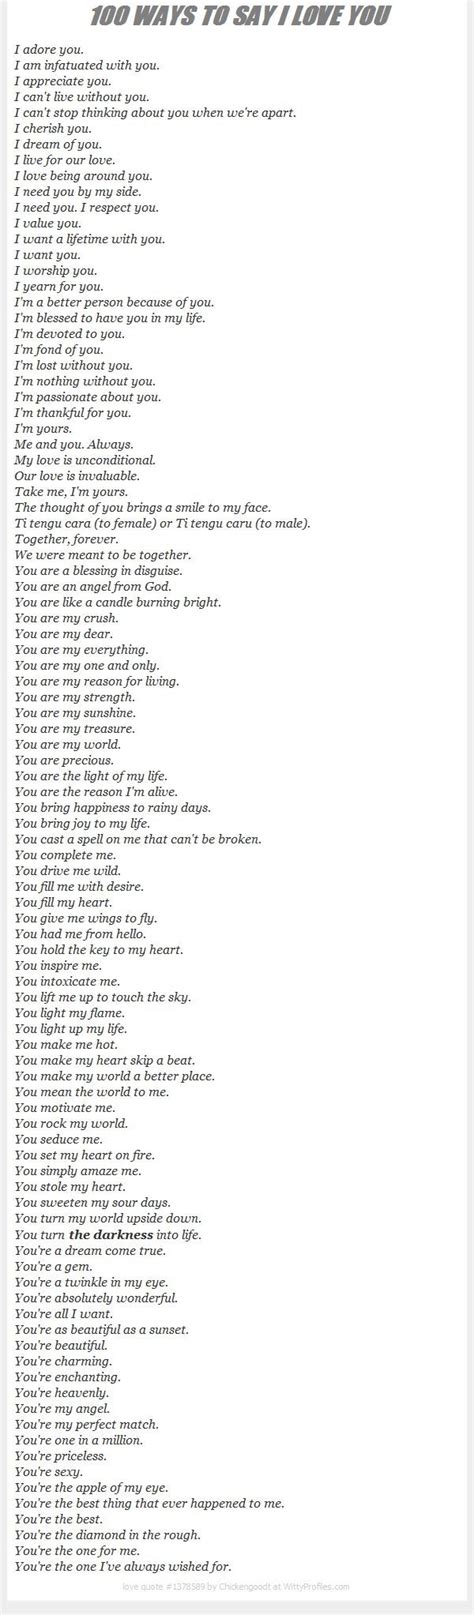 100 Ways To Say I Love You Pictures, Photos, and Images for Facebook ...